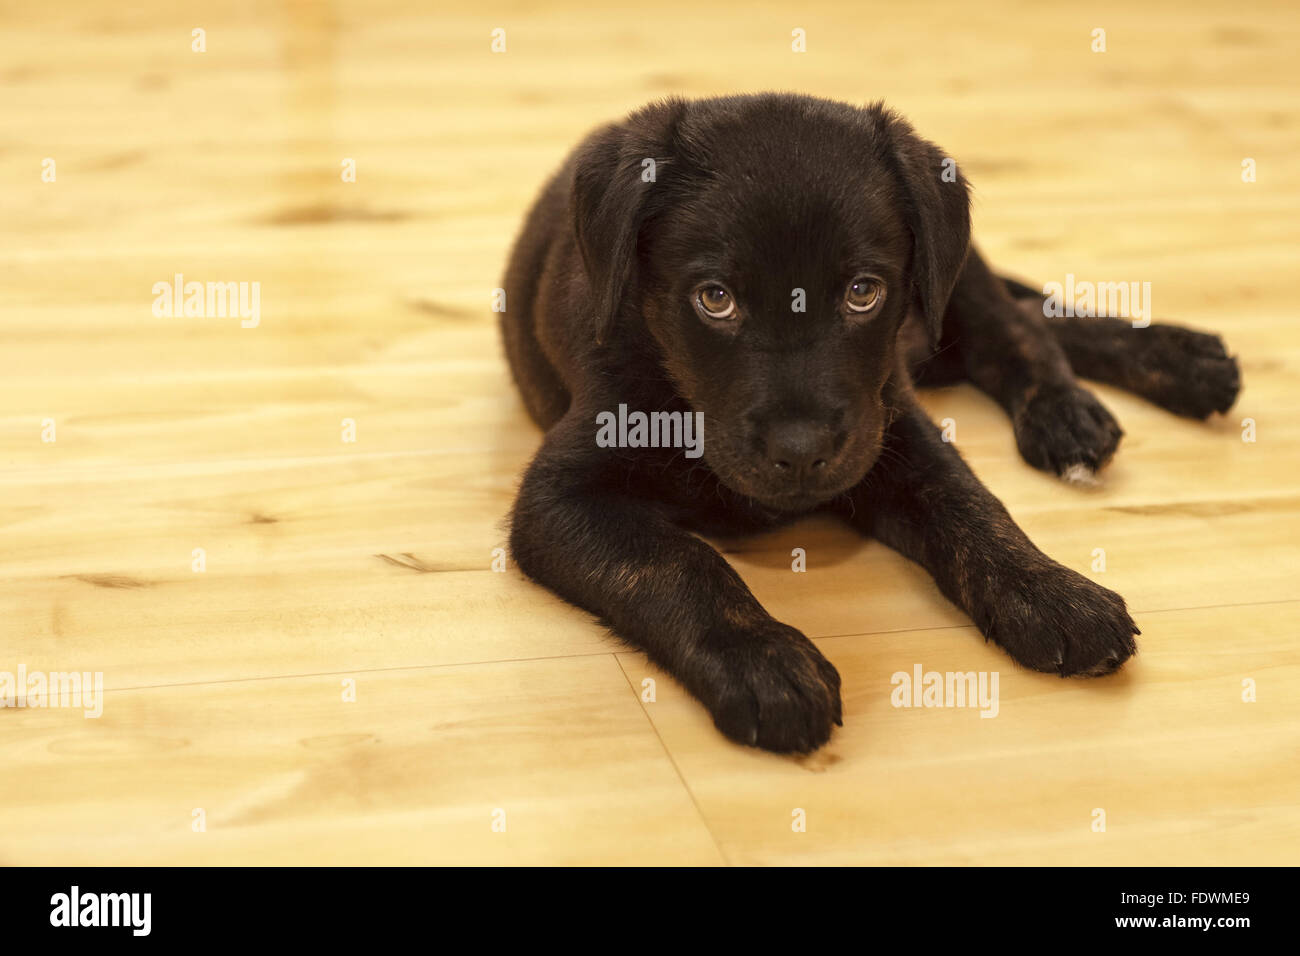 Black Rottweiler Labrador Retriever mixed breed puppy dog  Model Release: No.  Property release: Yes (dog). Stock Photo